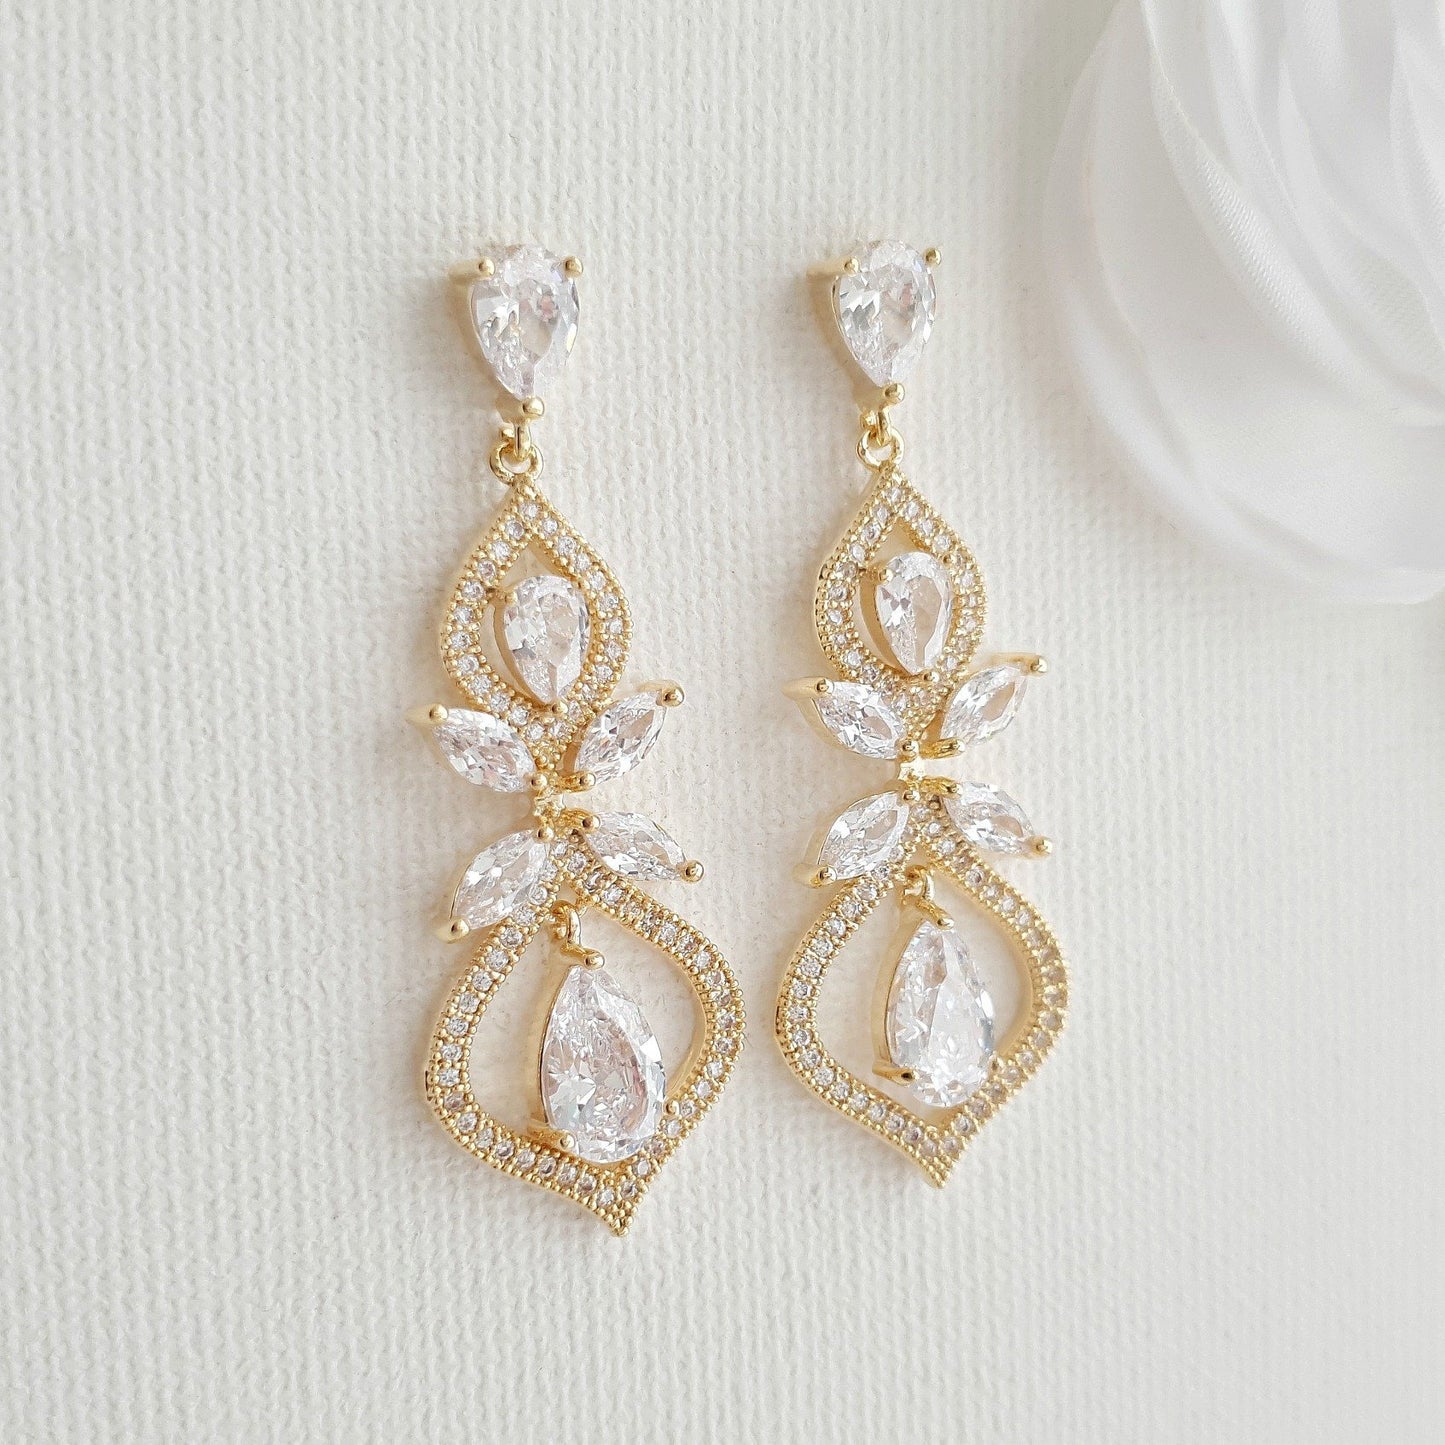 Gold Wedding Earrings for Brides